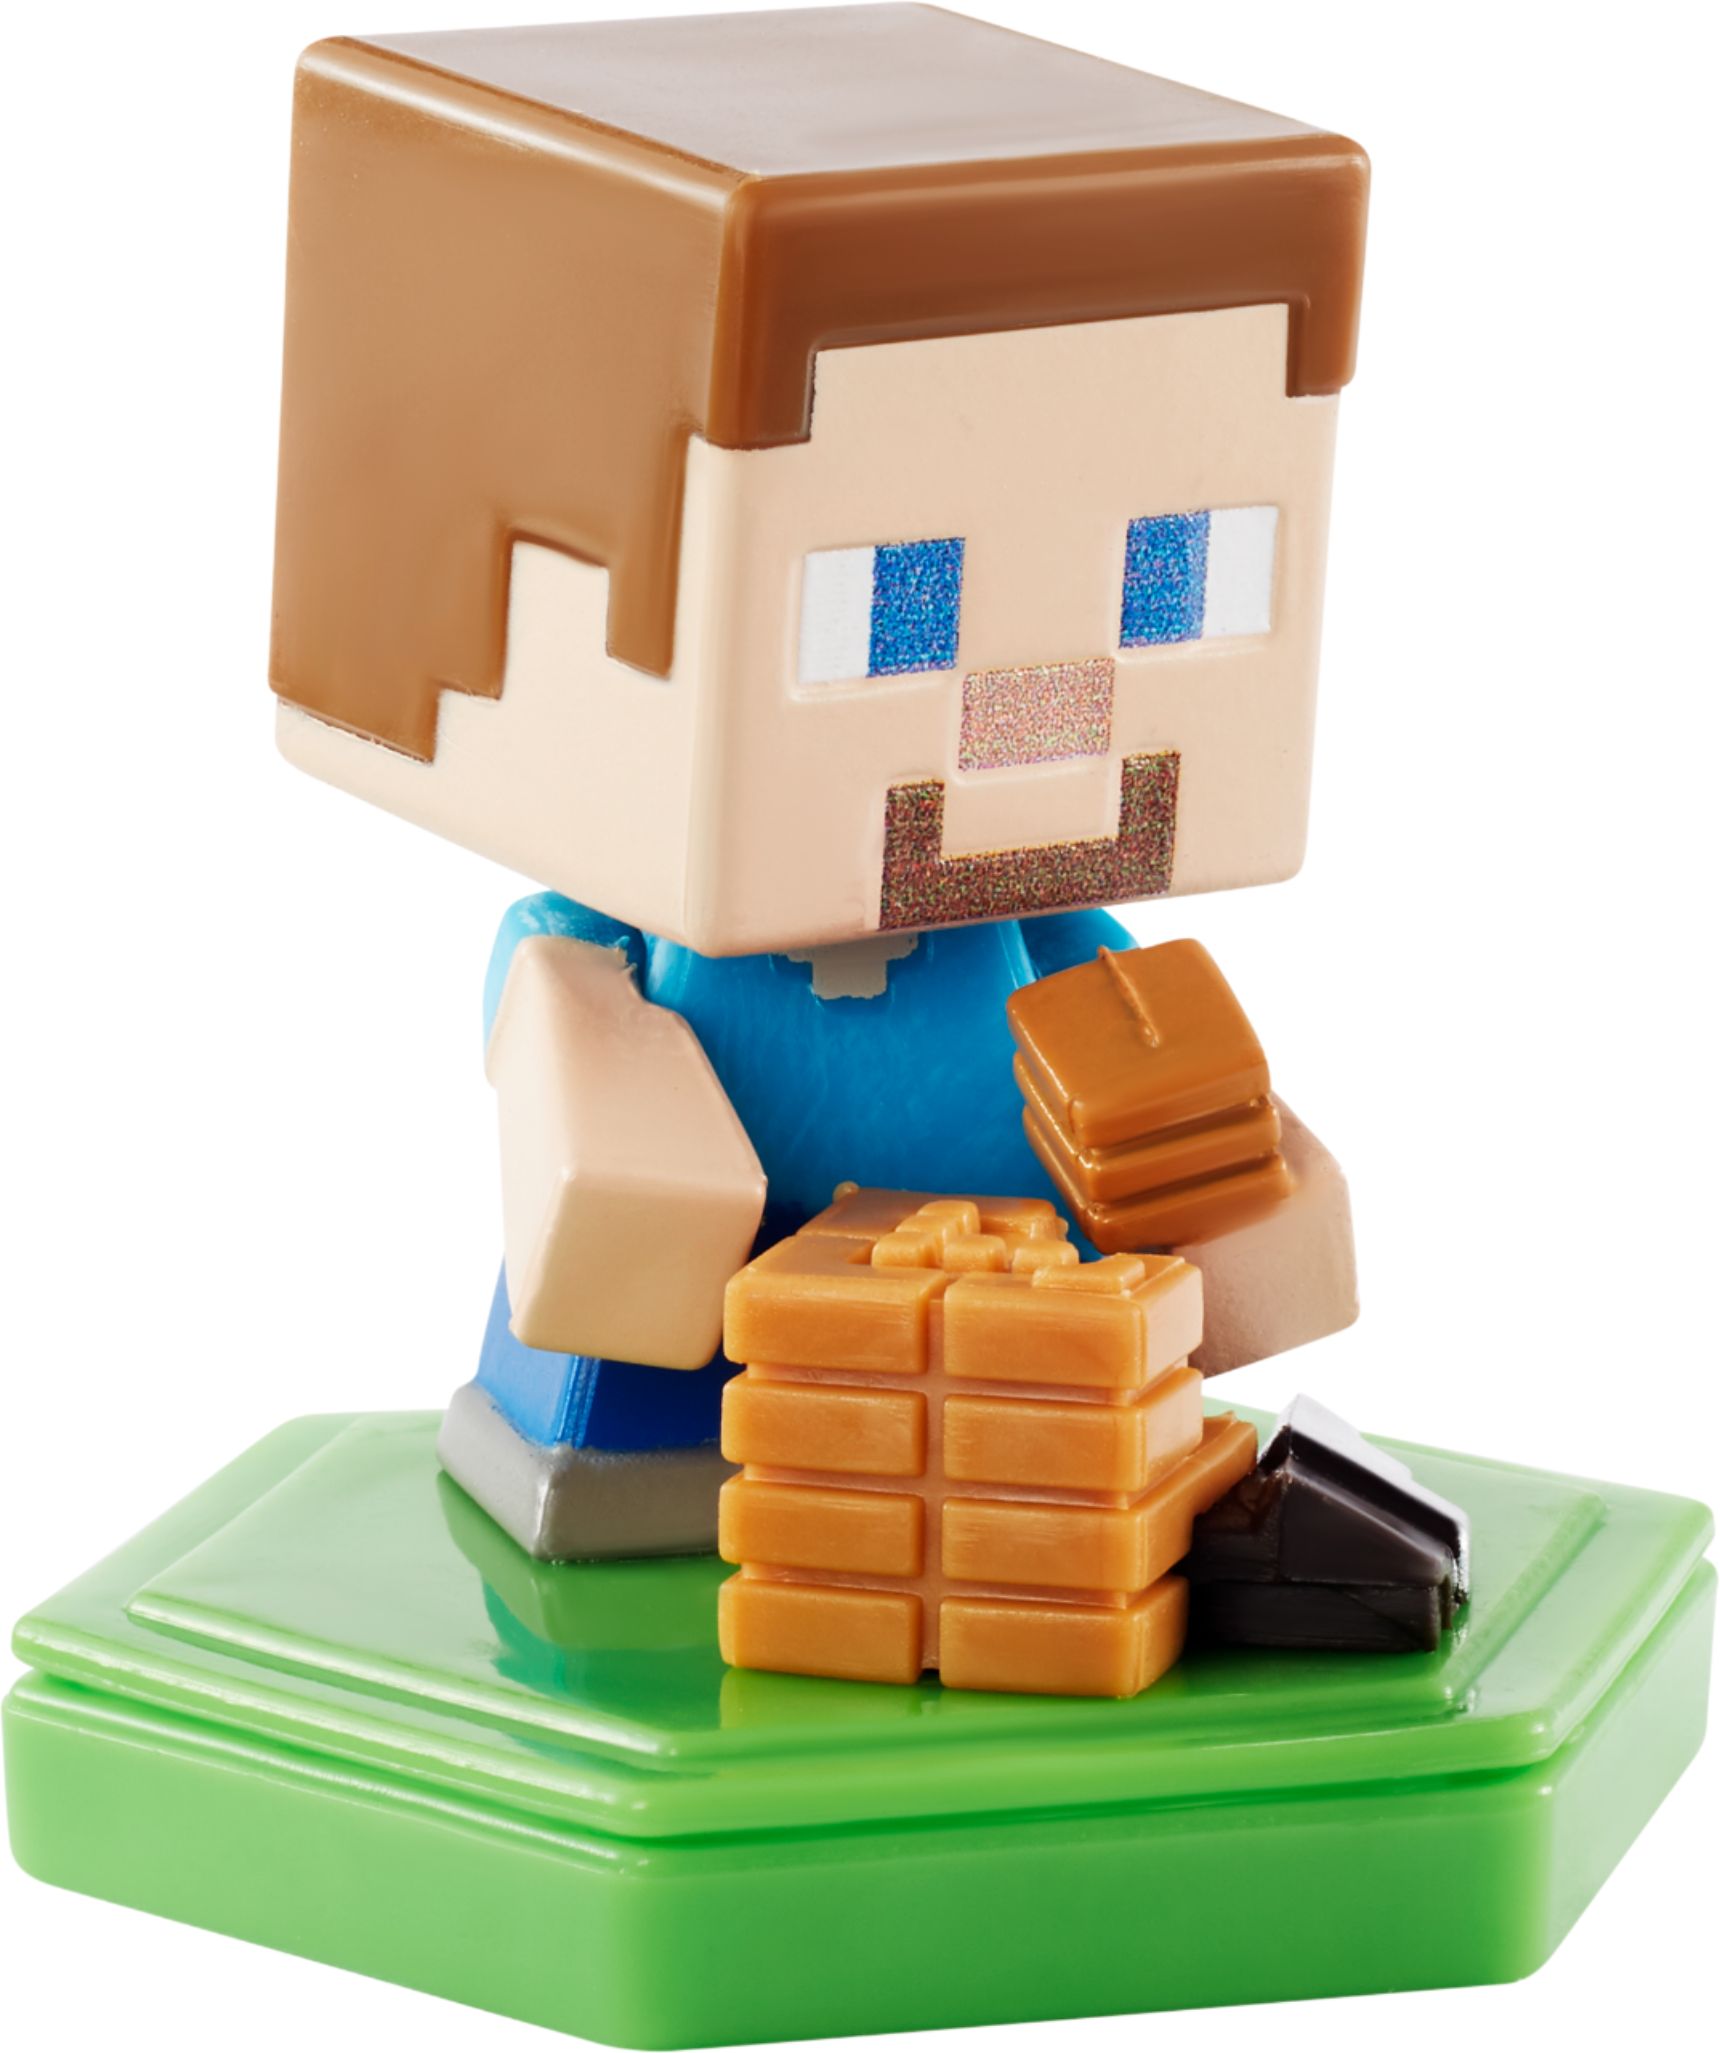 Minecraft Earth Boost Mini Figure (2-Pack) Styles May  - Best Buy